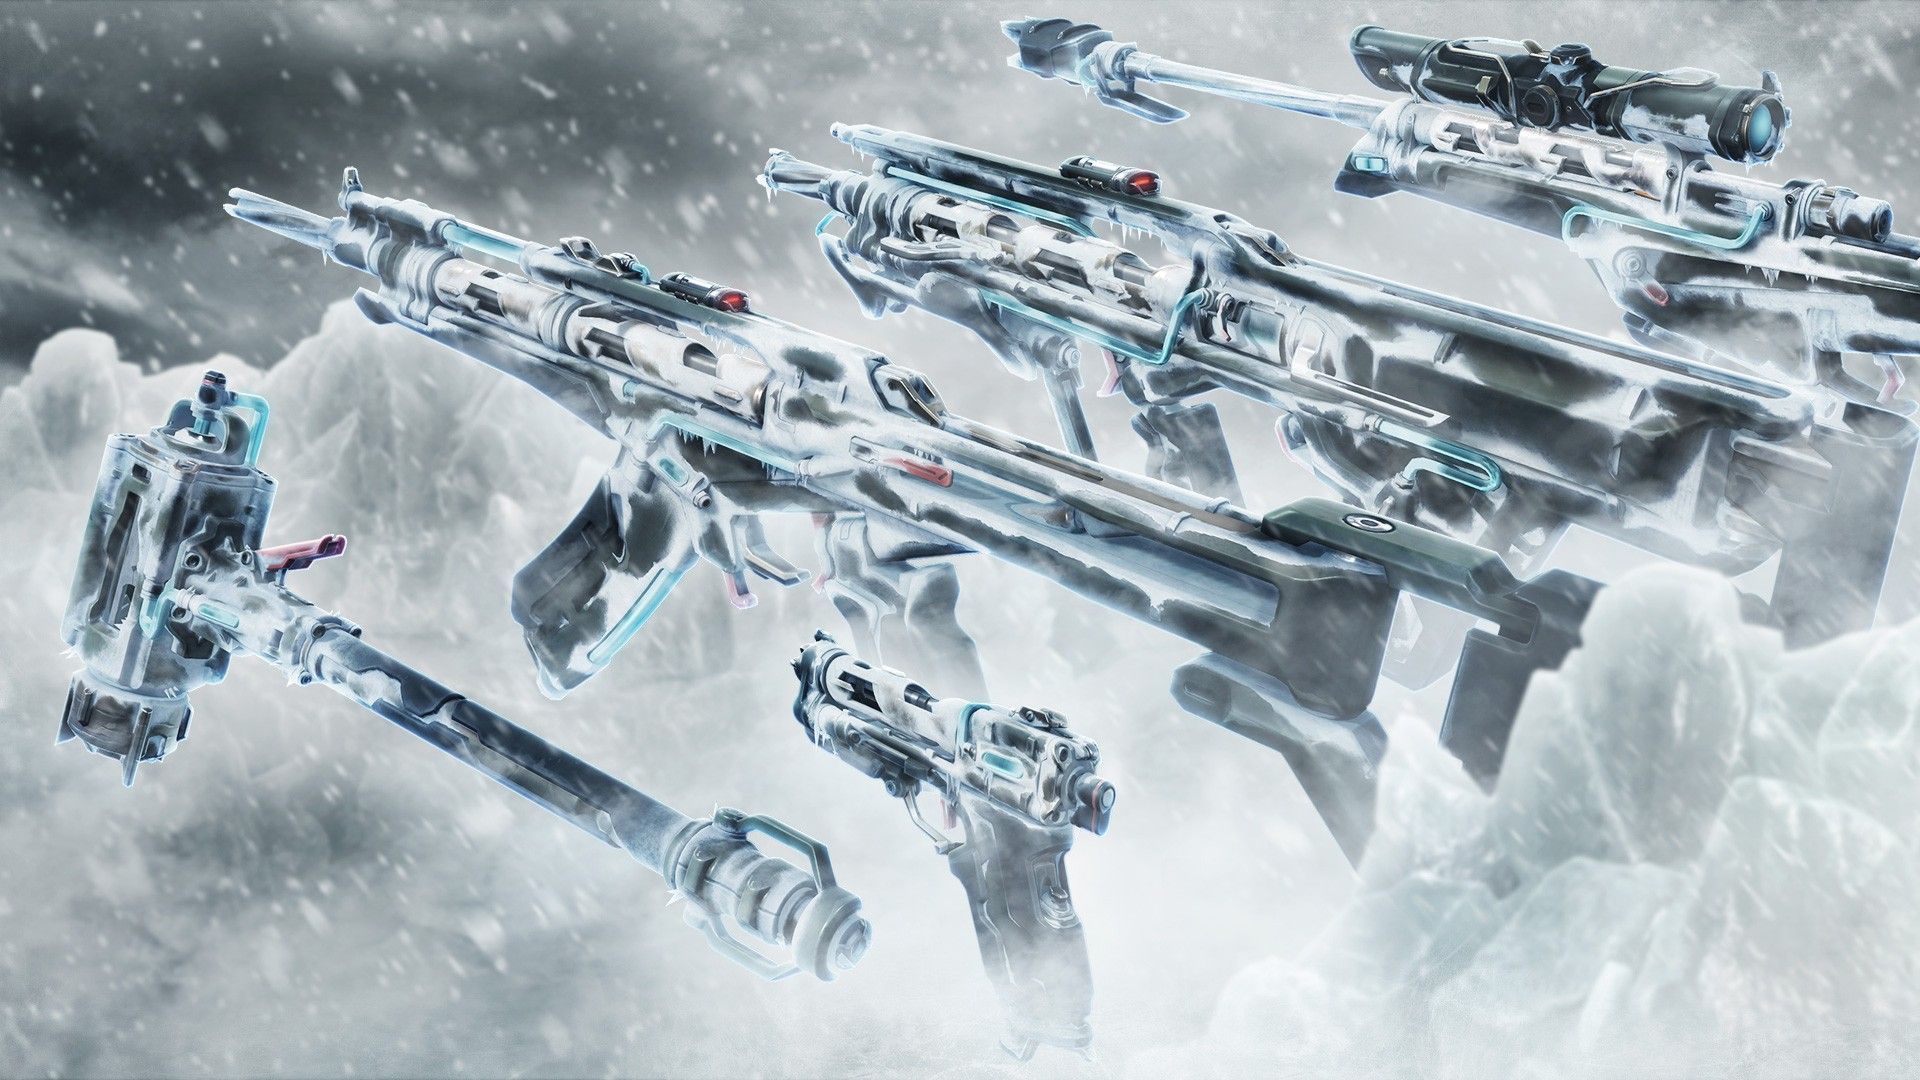 Valorant Cryostasis Weapons shown covered in ice.